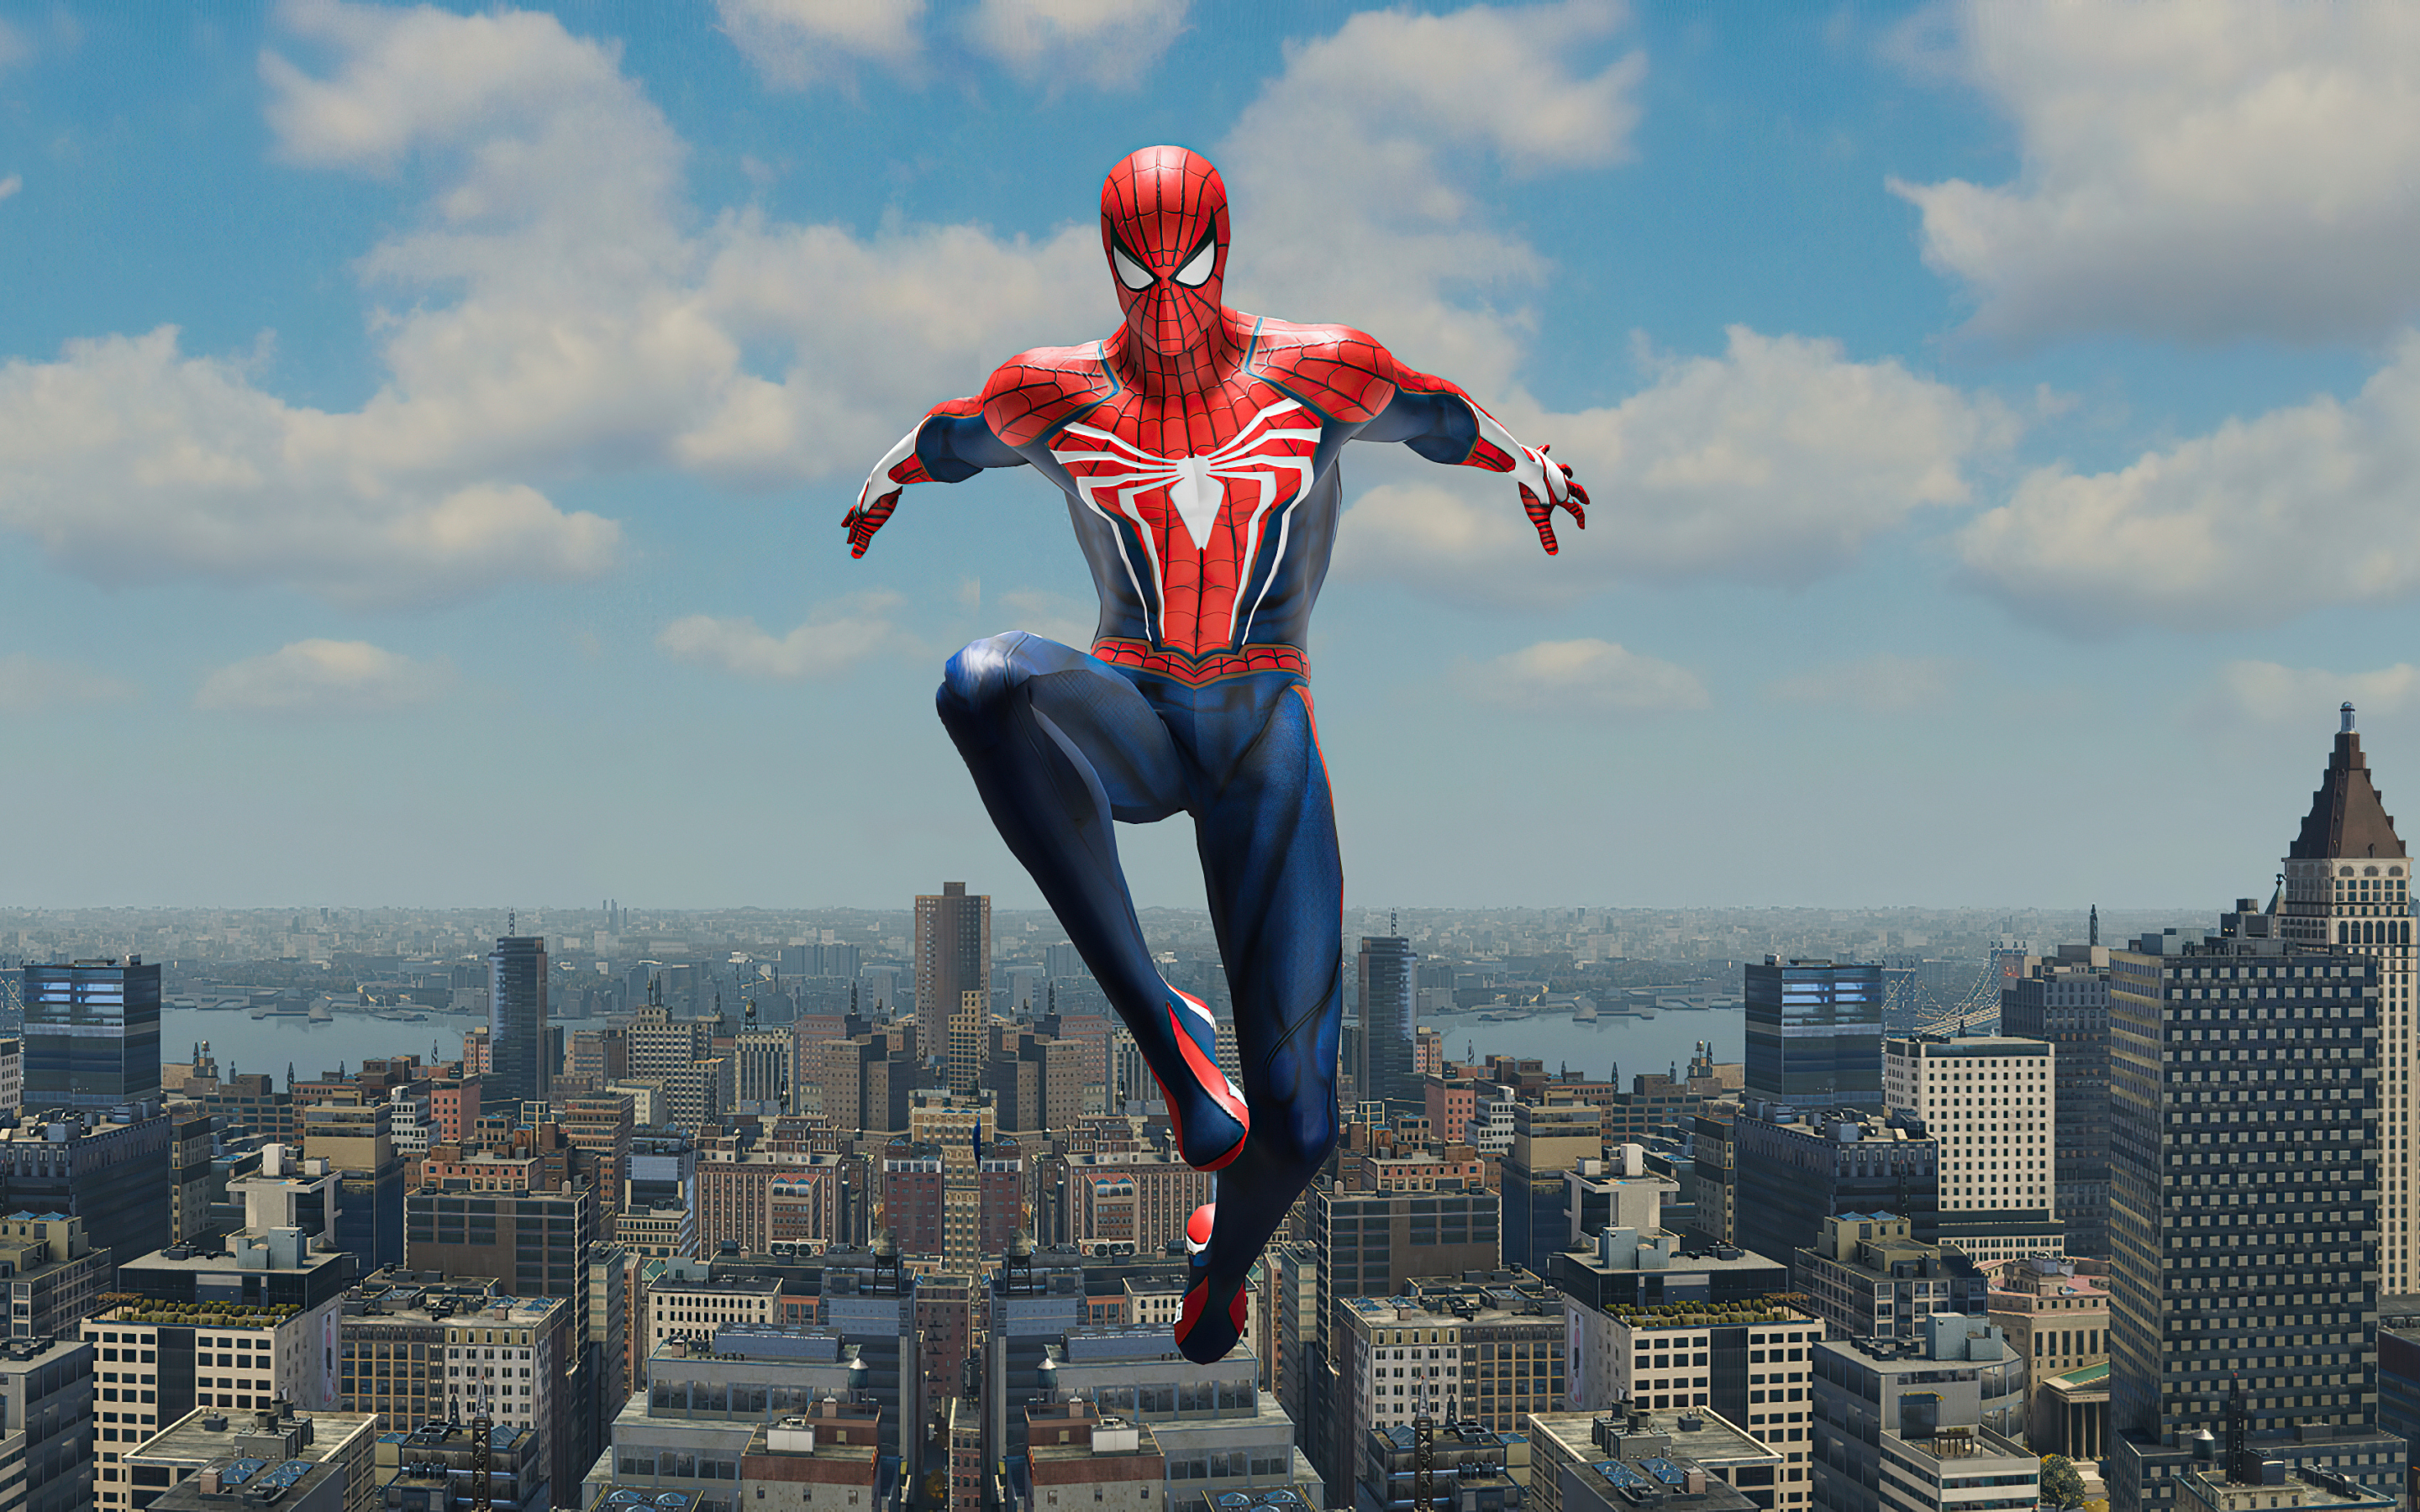 Spider-man, PS4 game, new yorker, 2880x1800 wallpaper